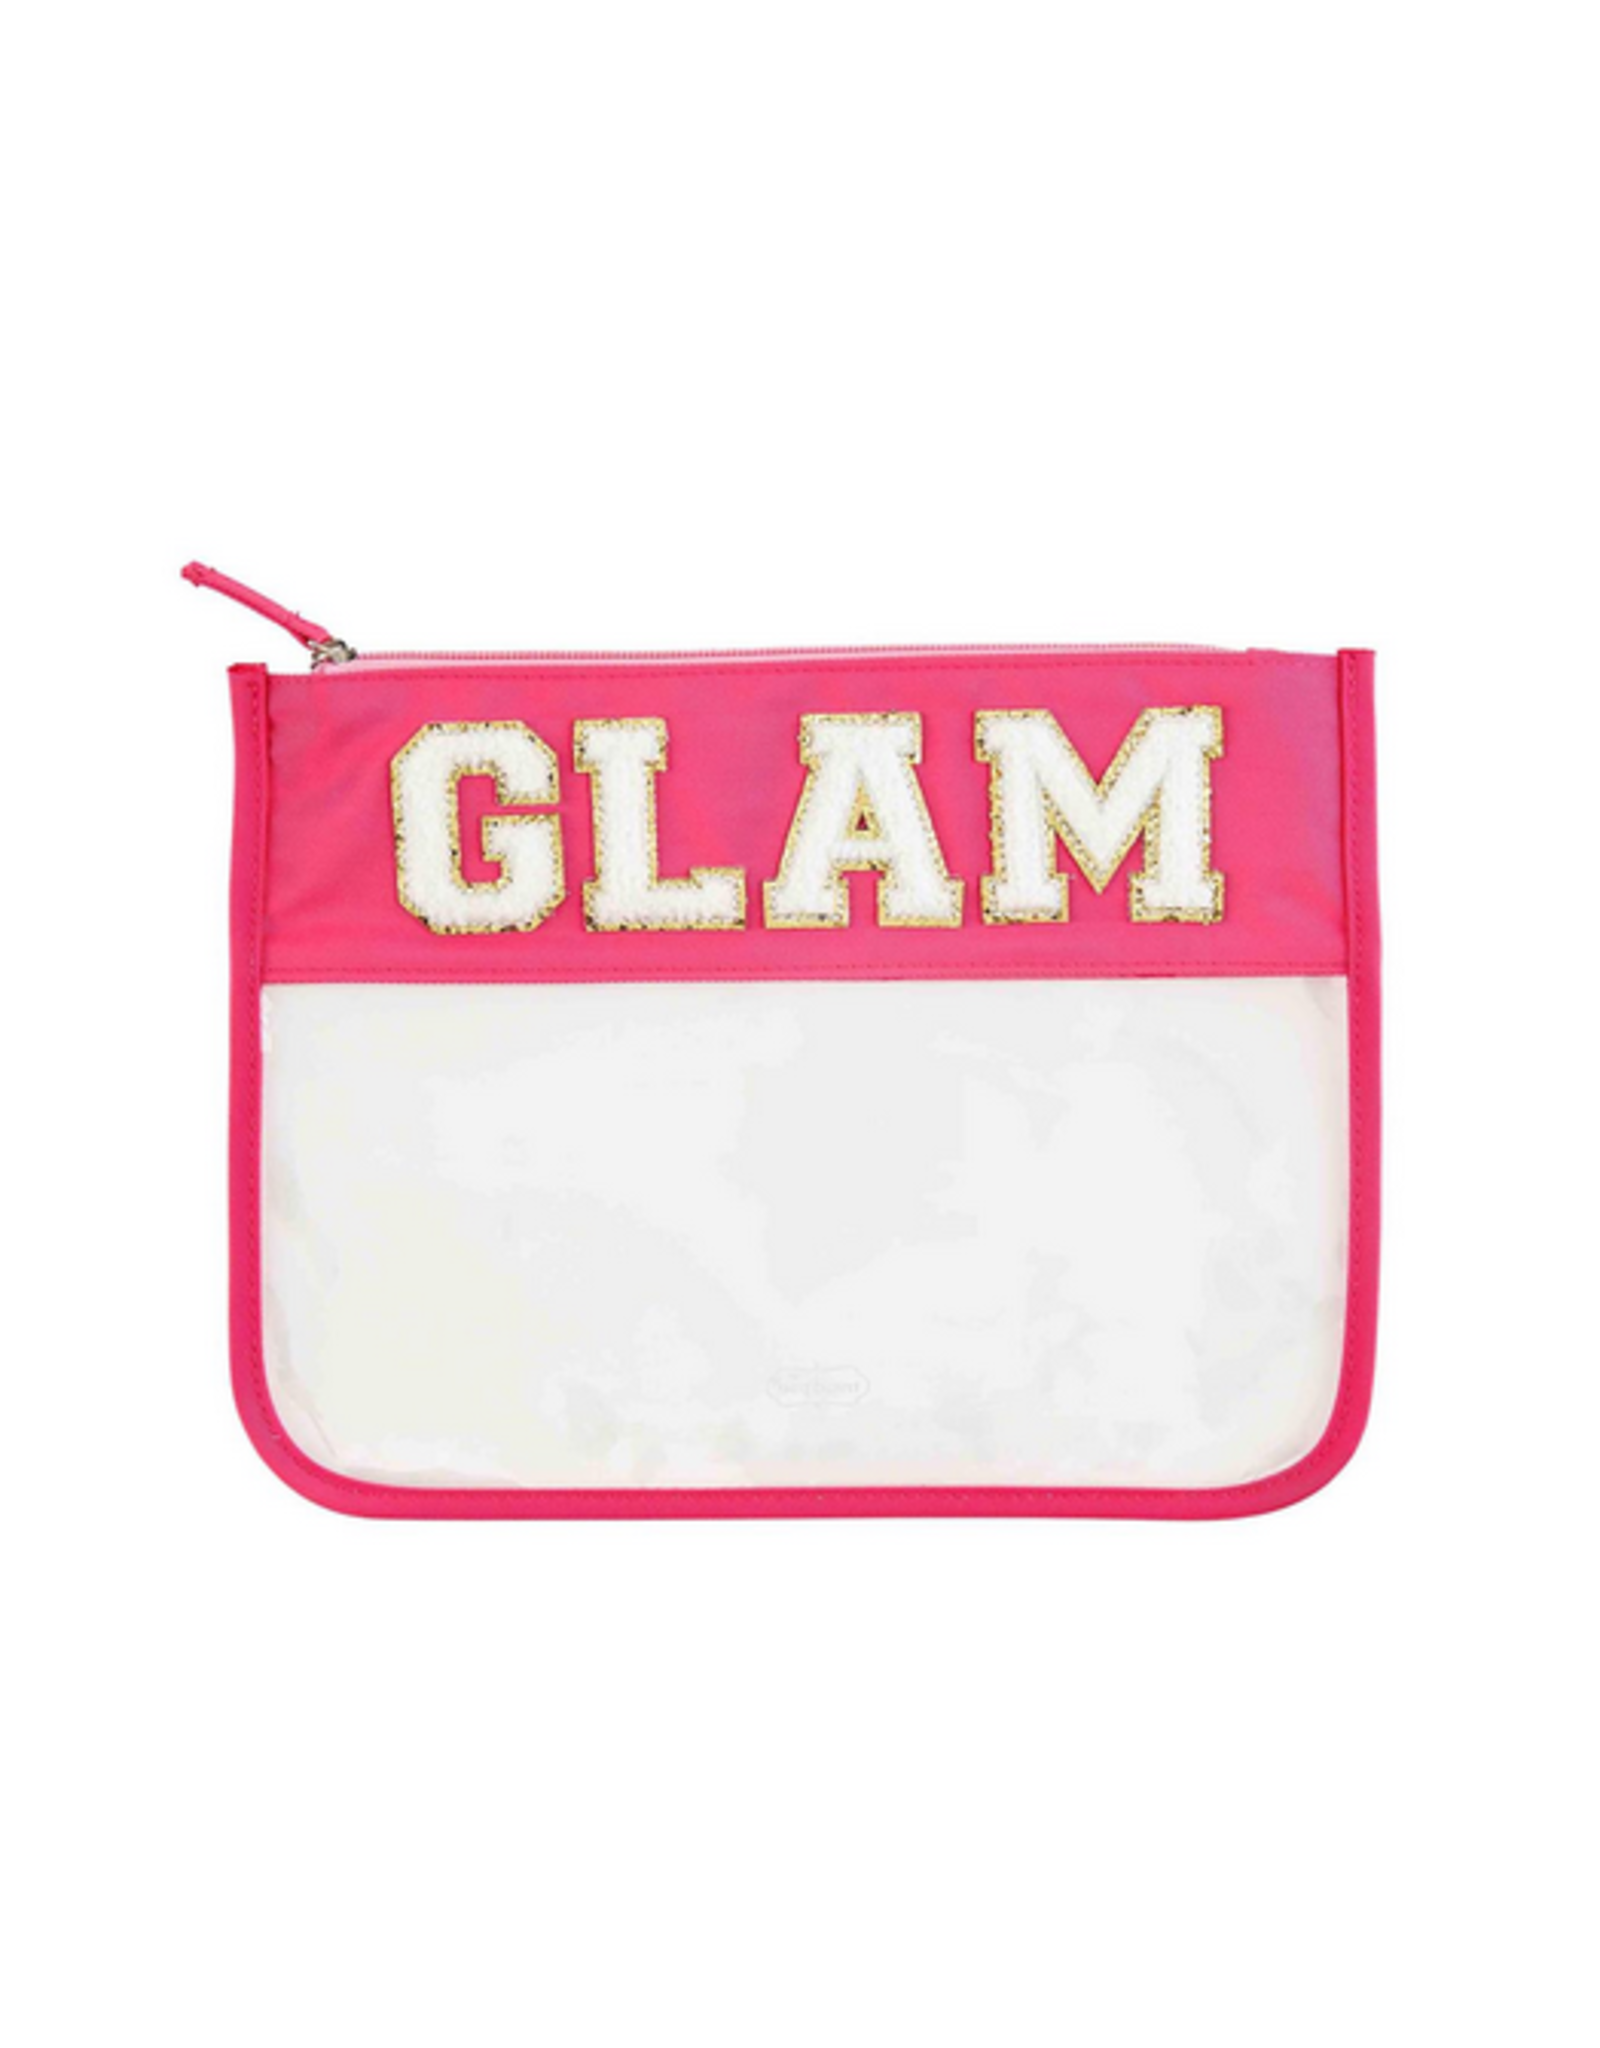 Clear Patch Case Glam